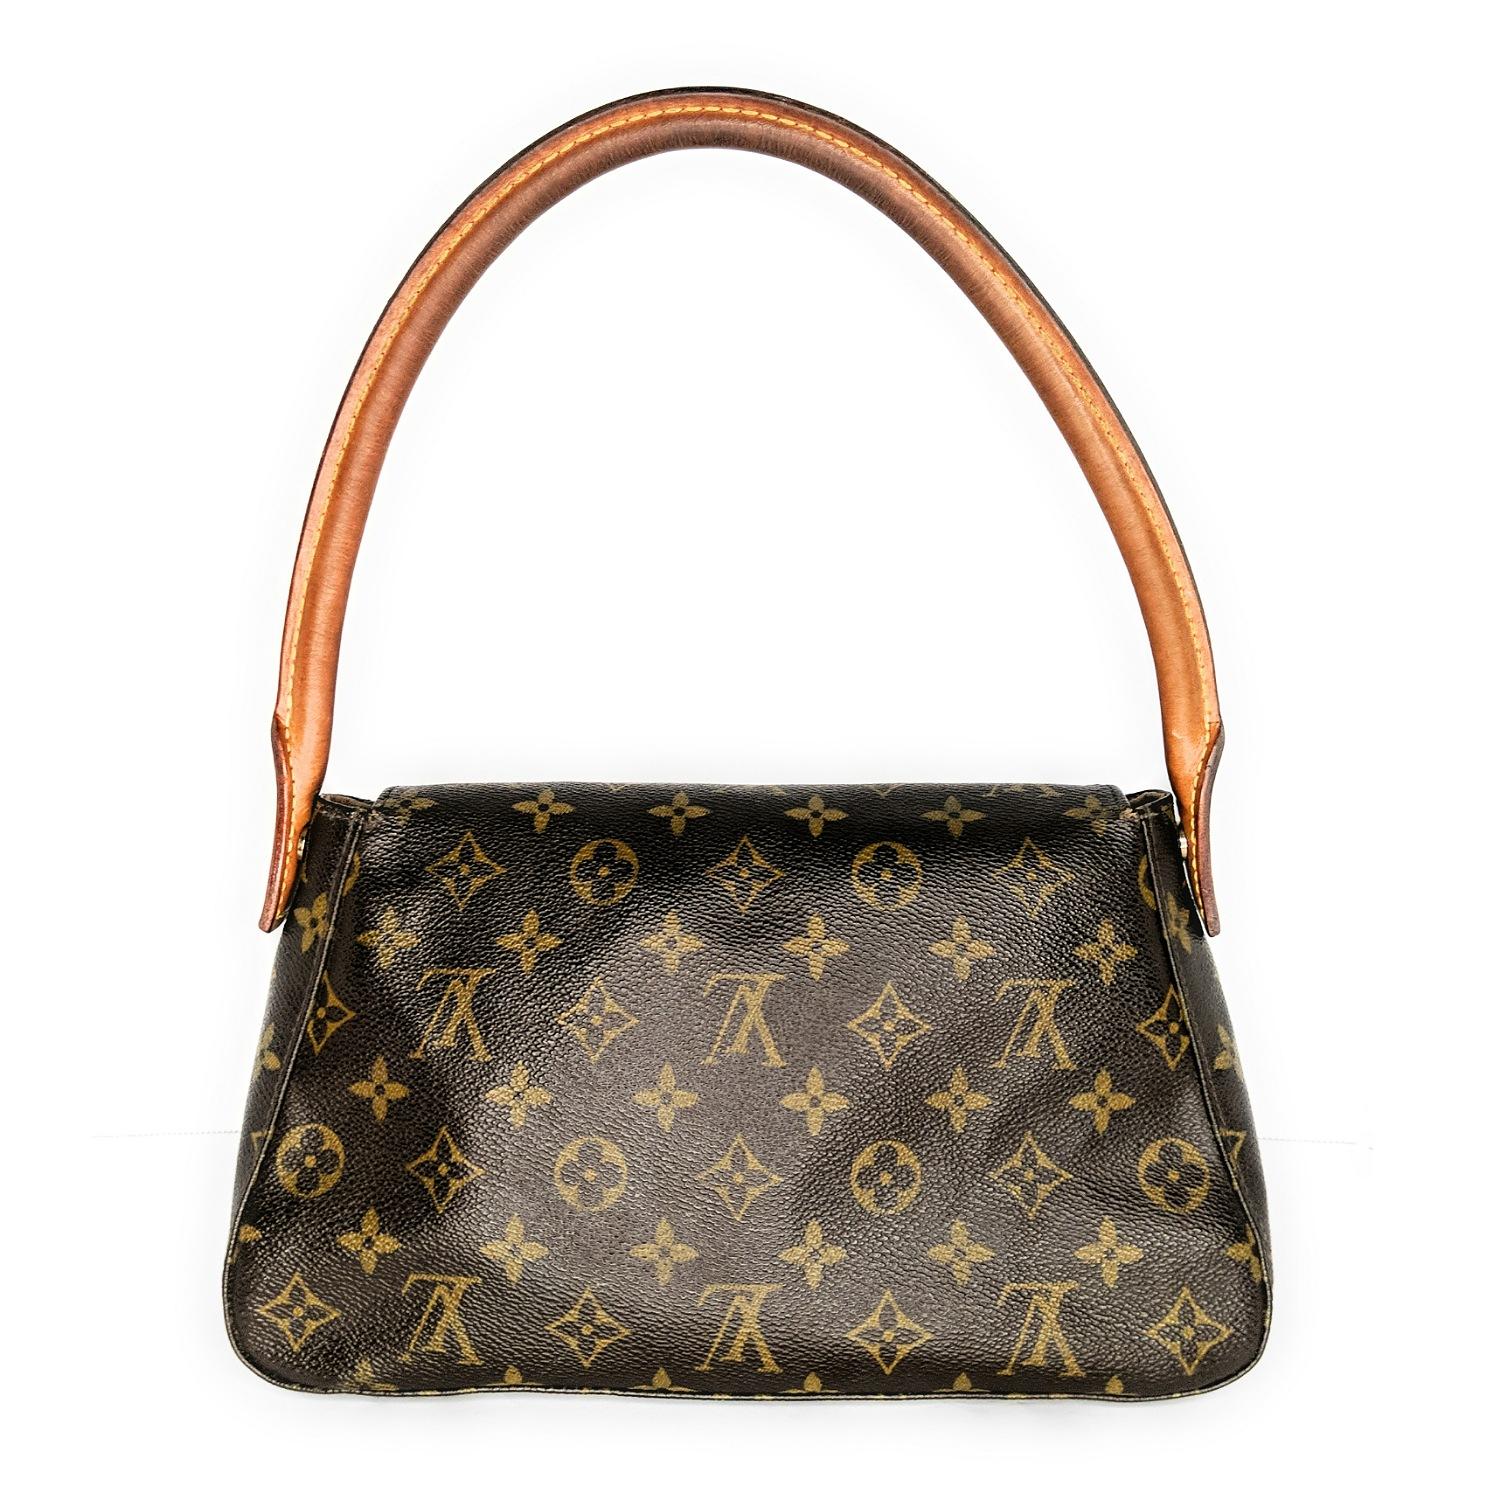 Brown and tan monogram coated canvas Louis Vuitton Looping shoulder bag with brass hardware, single rolled shoulder strap, tan vachetta leather trim, brown woven lining, single zip pocket at interior wall and magnetic snap closure at front flap.